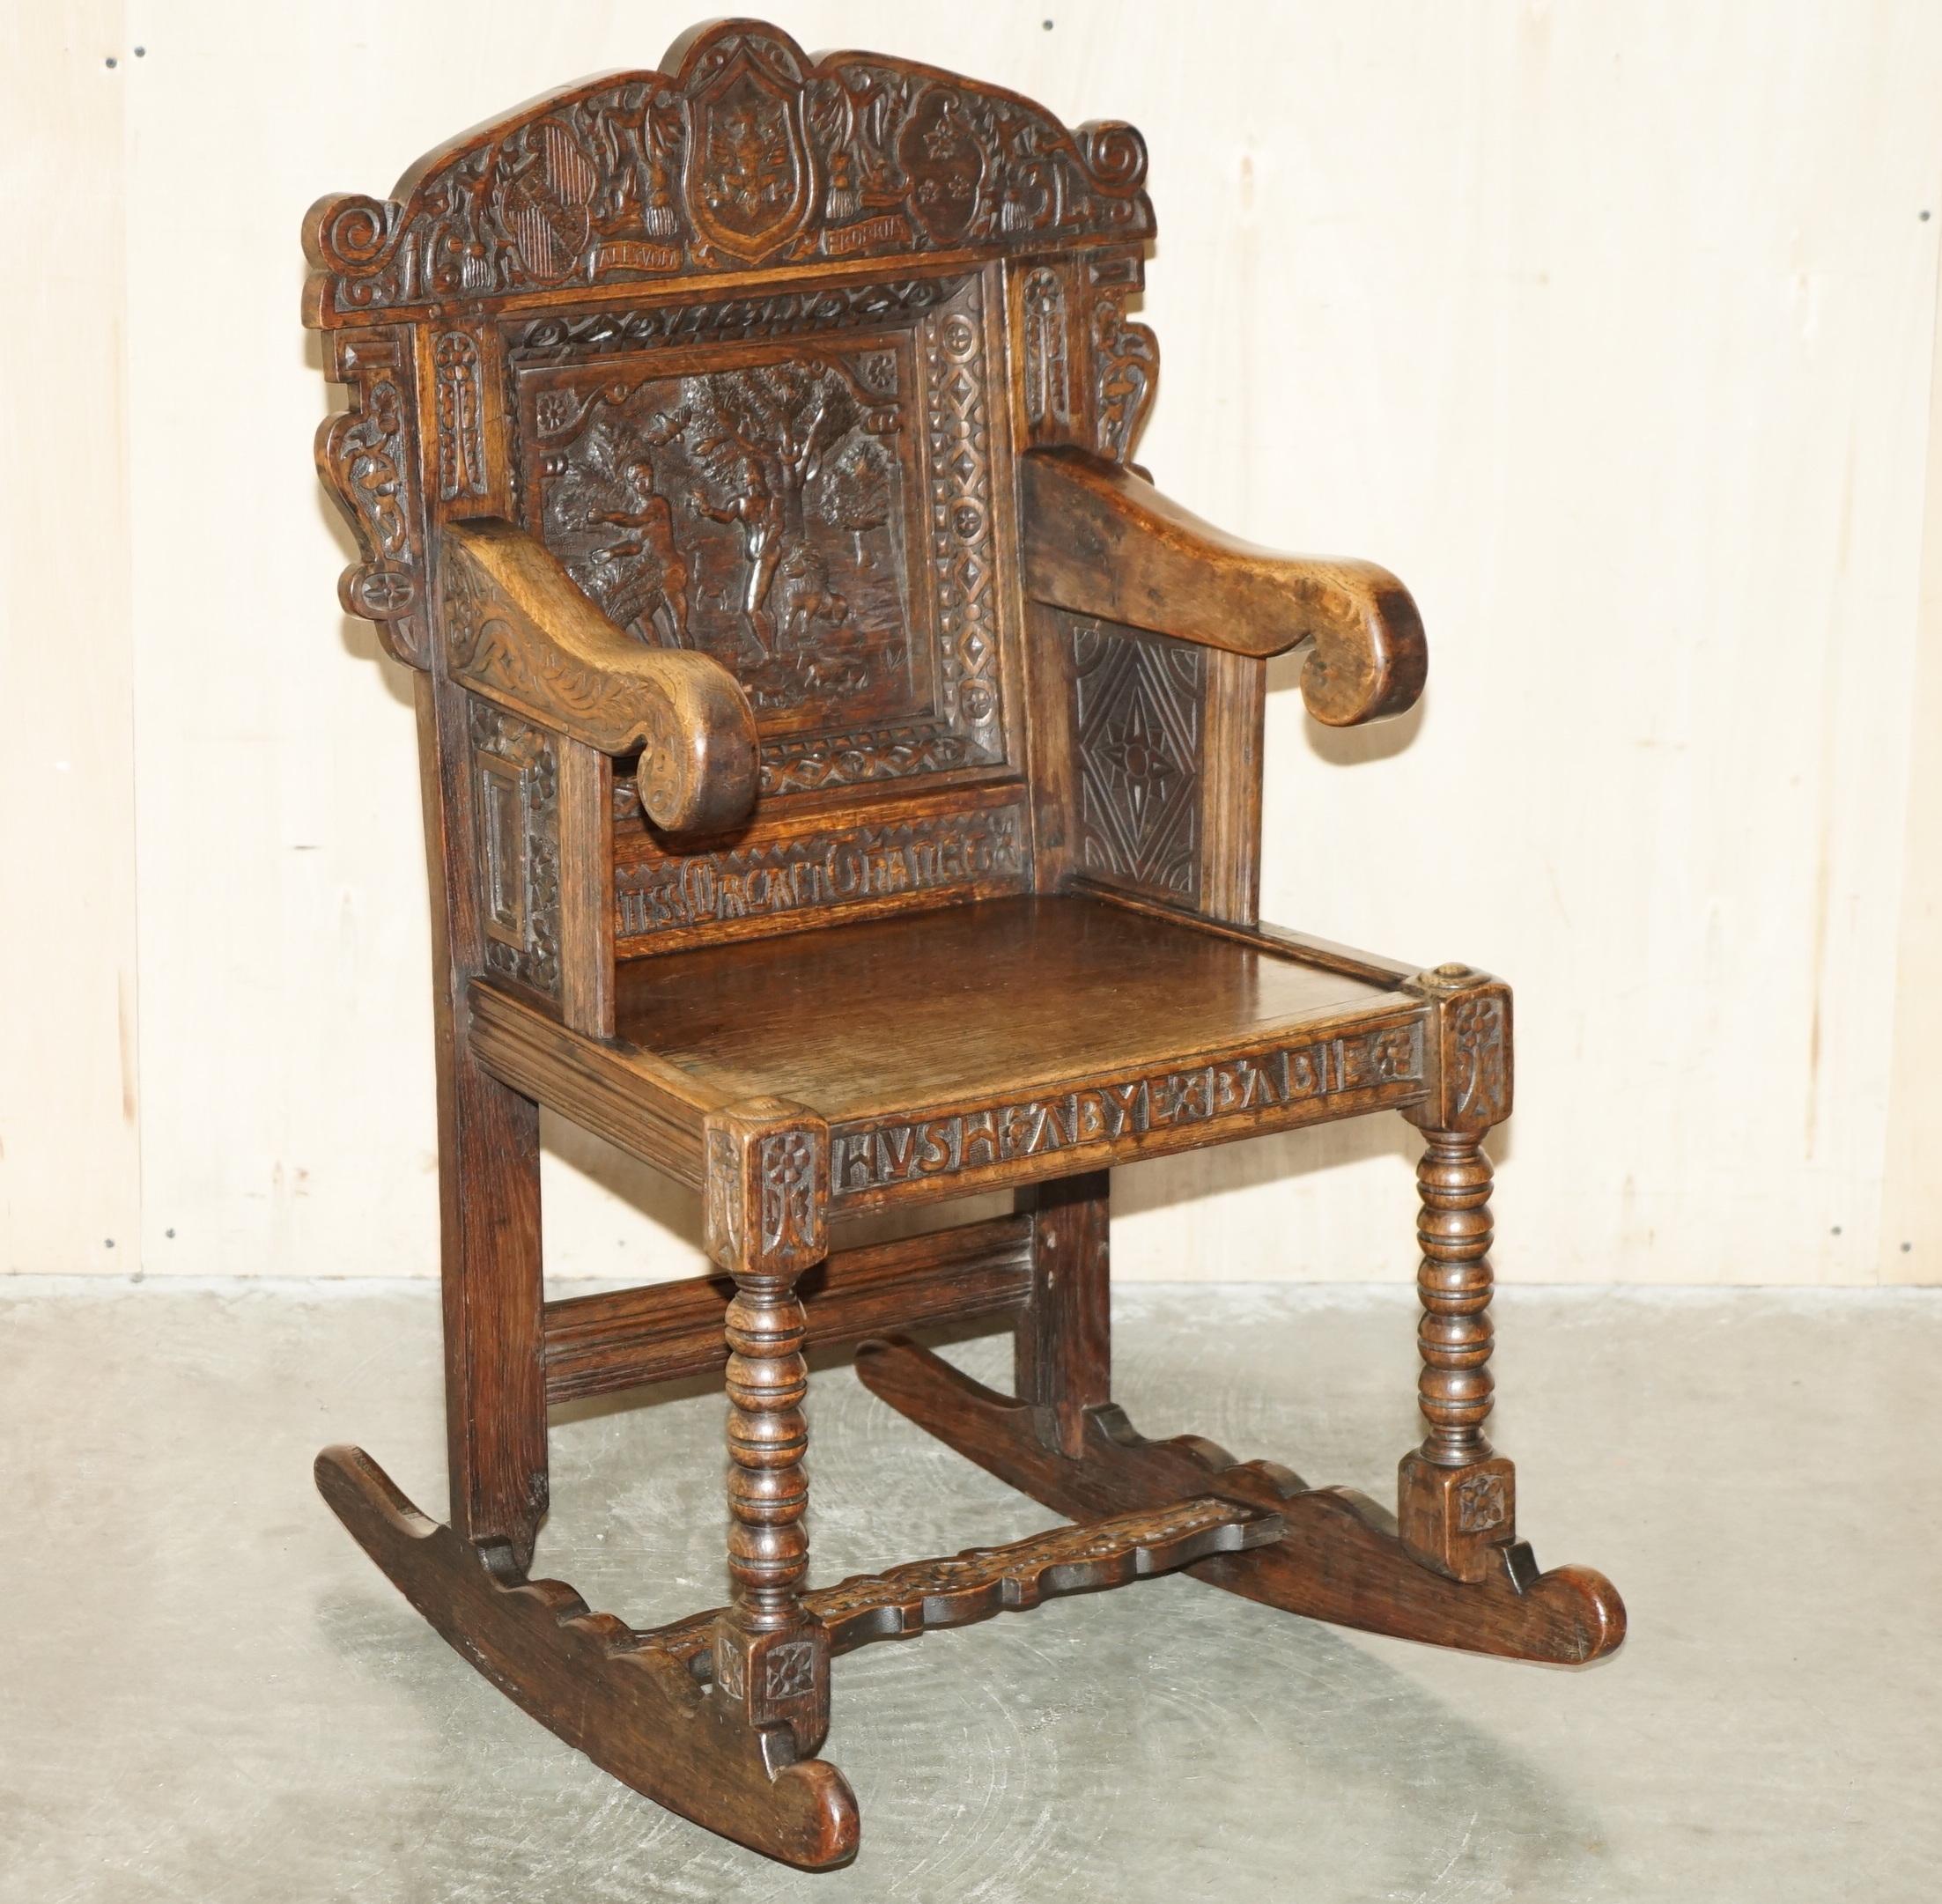 Royal House Antiques is delighted to offer for sale this super rare and highly collectable hand carved 1631 dated Charles I rocking chair with ornately carved panels depicting Adam & Eve with the forbidden fruit and some very interesting Henry VIII